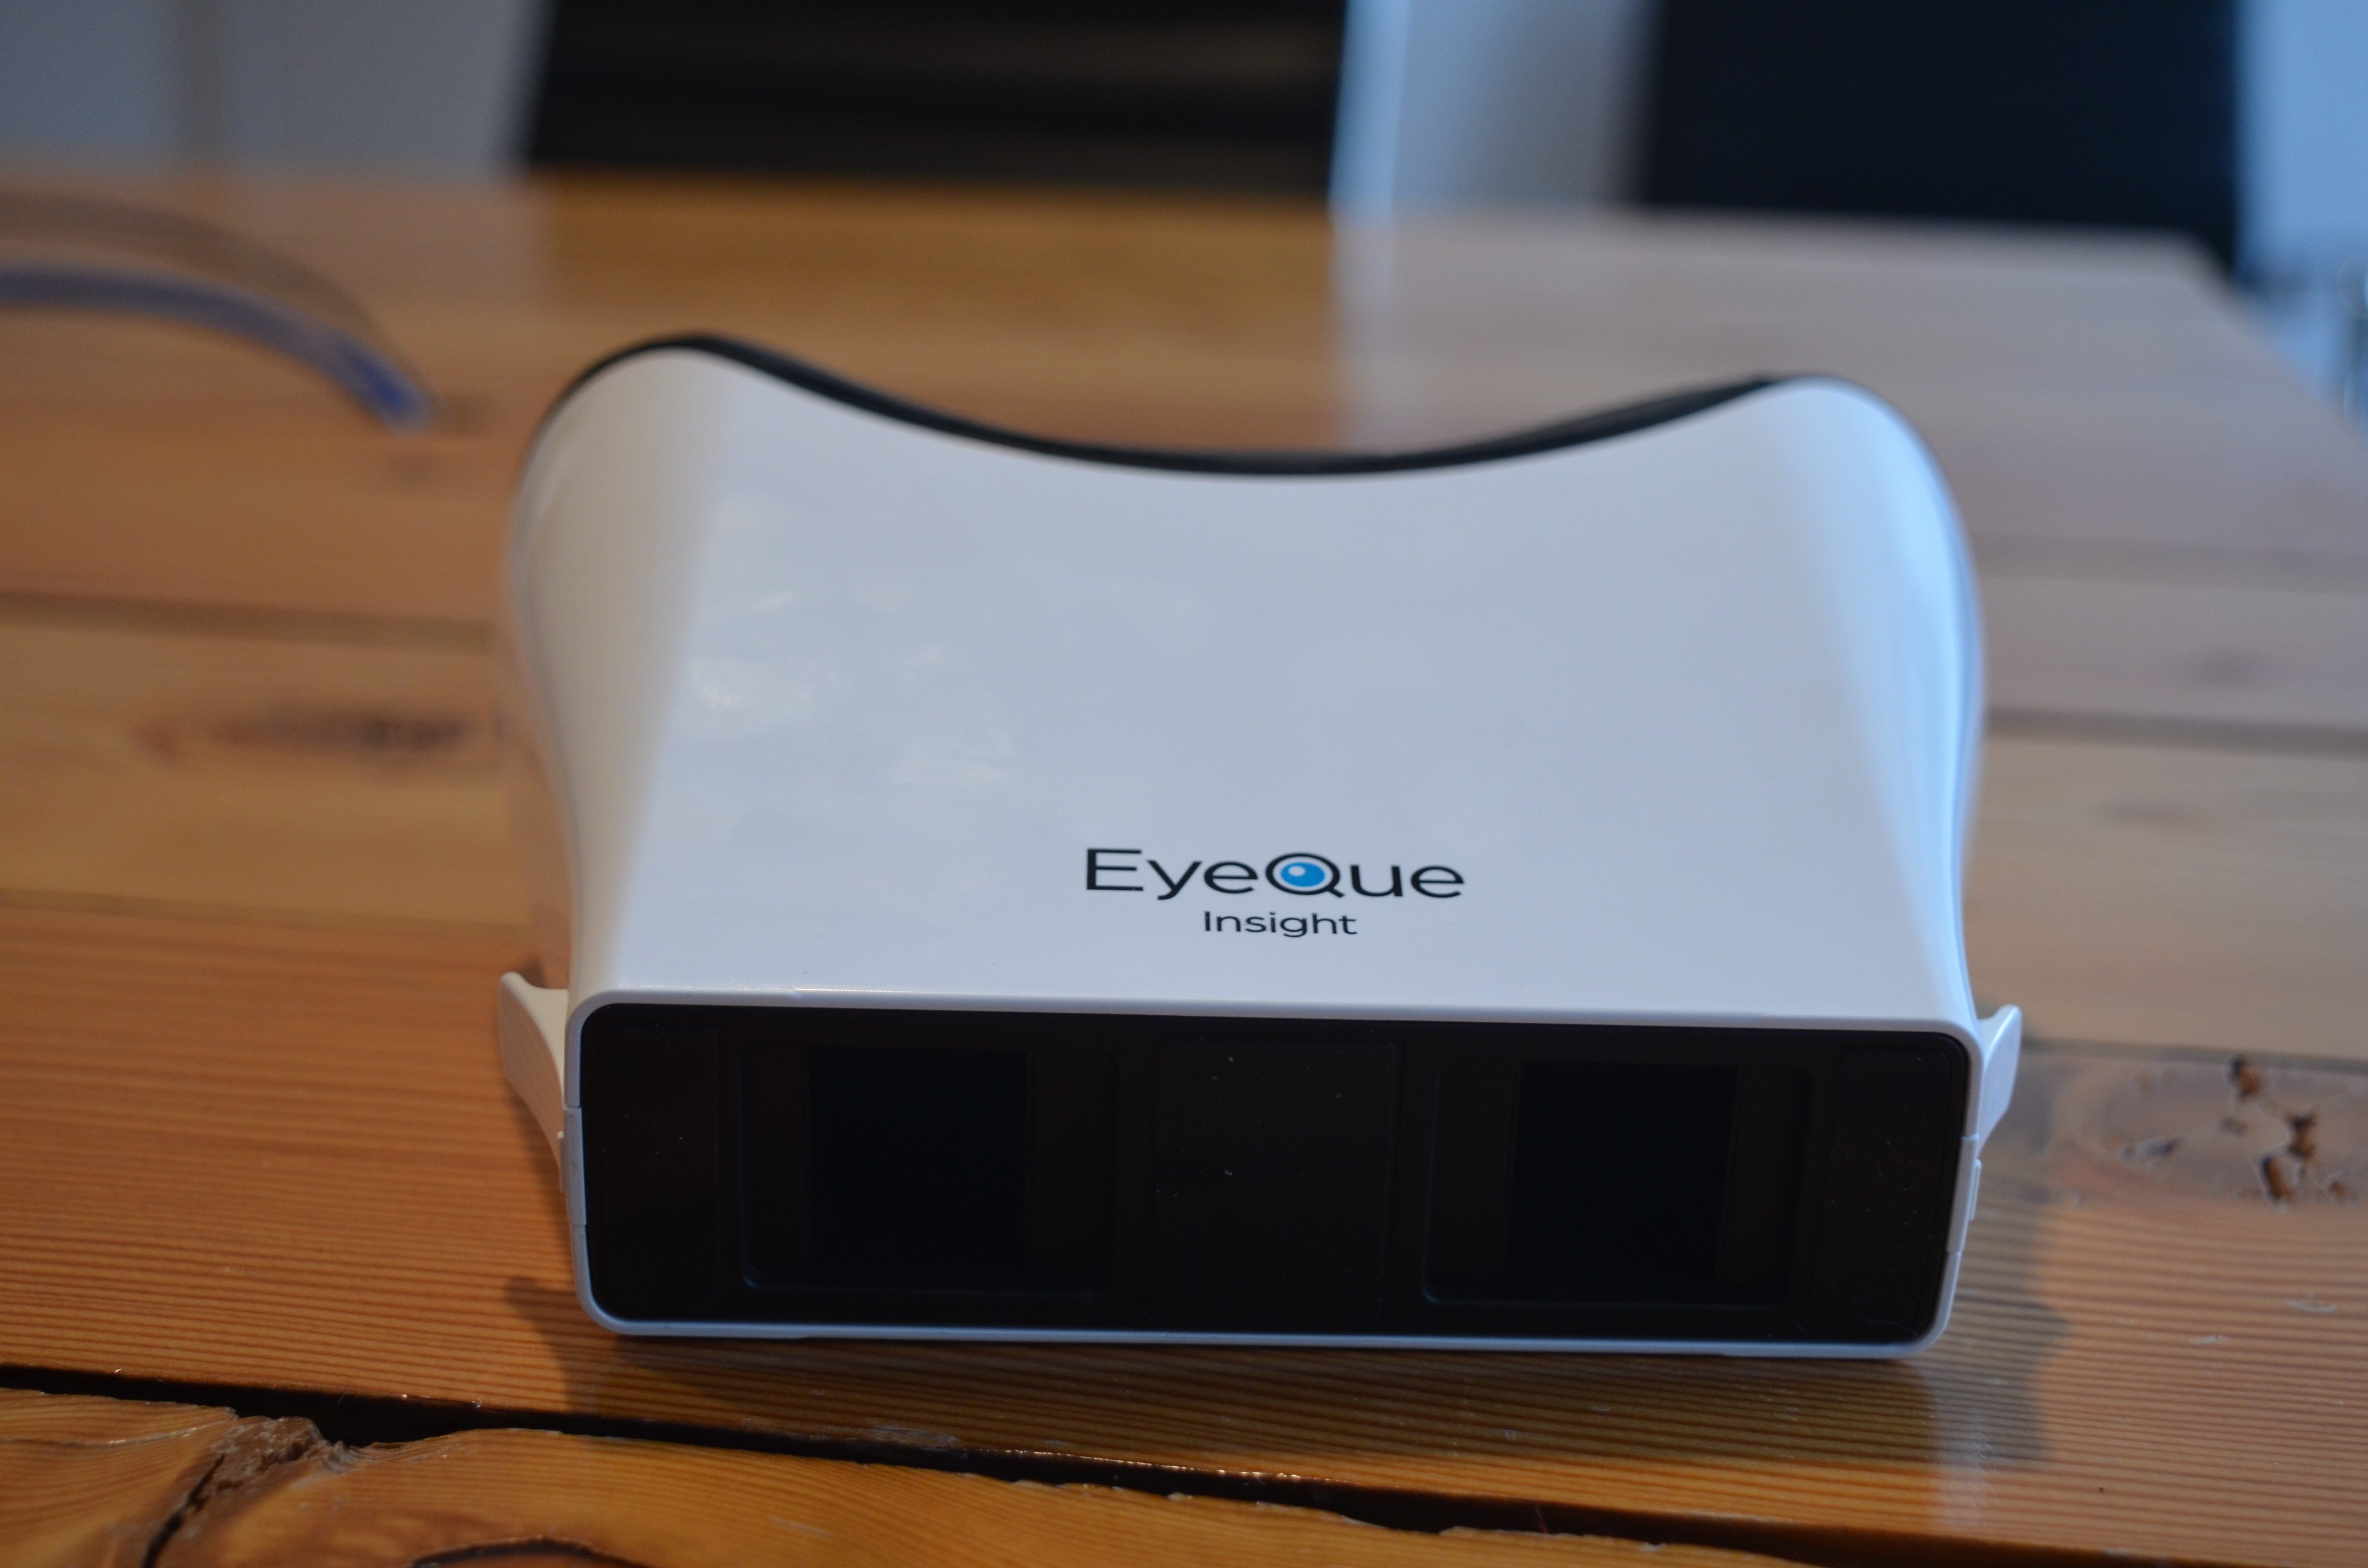 eyeque insight now available for purchase 4